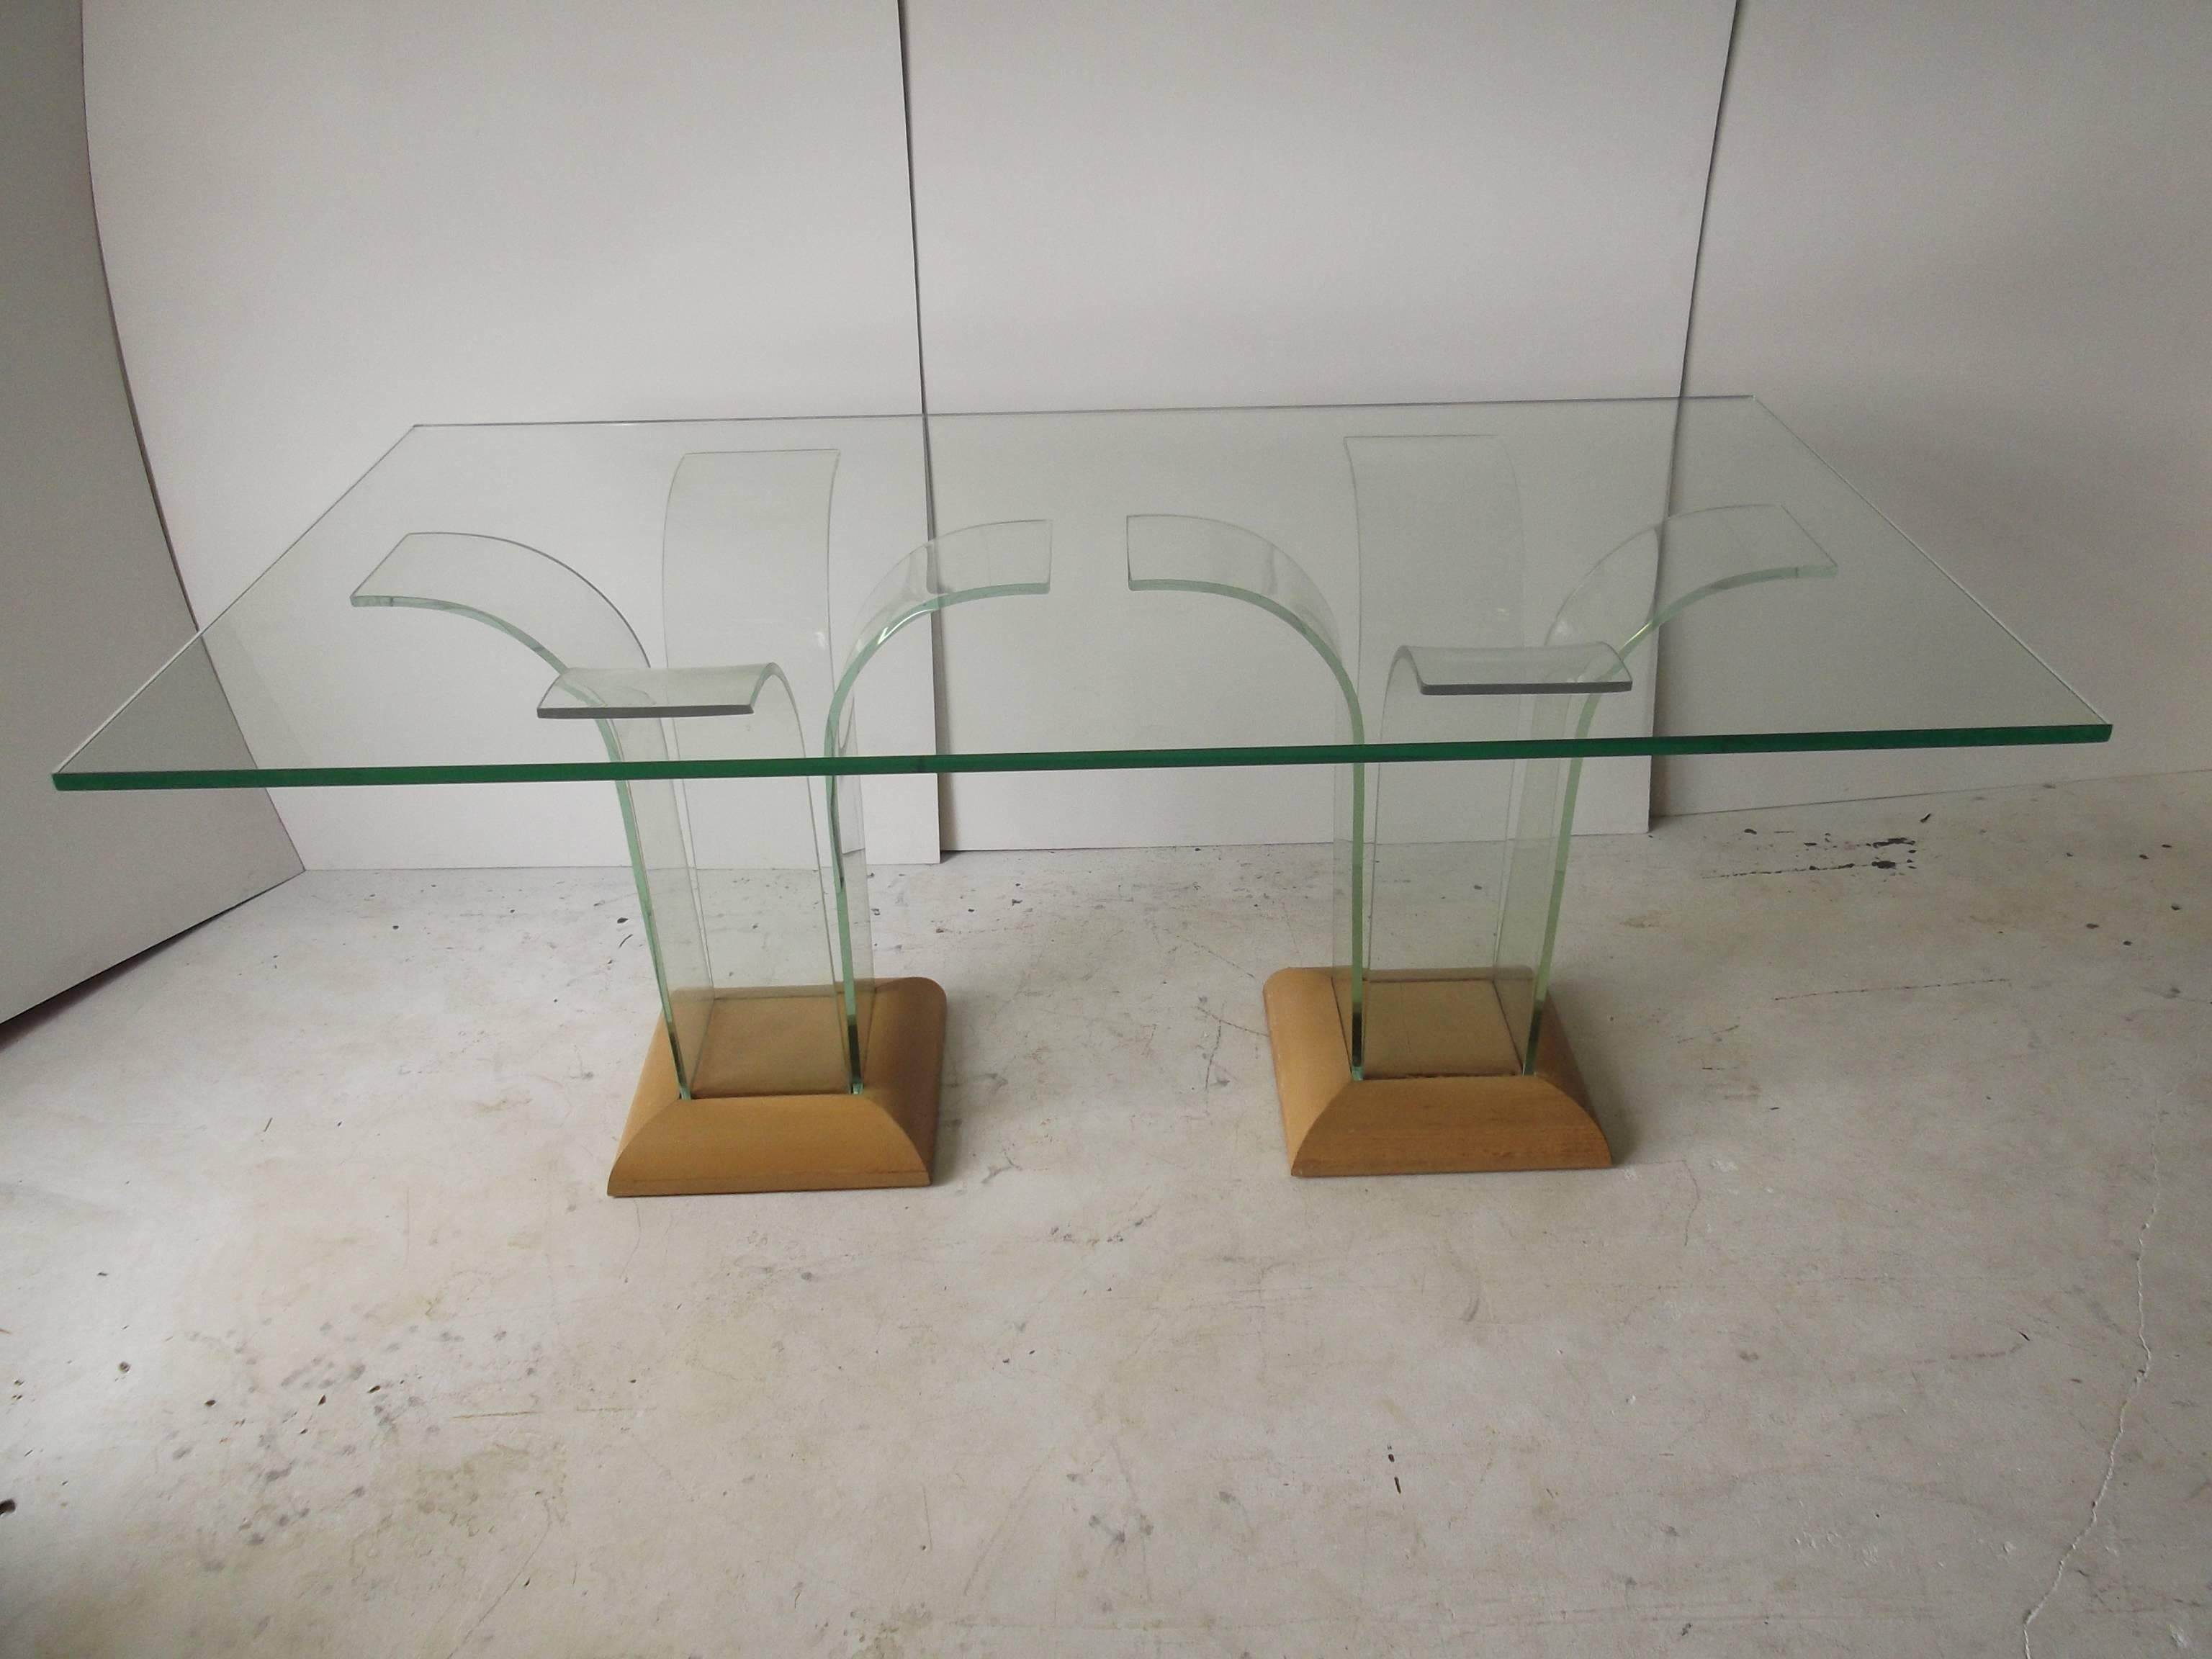 This is an exceptional dining table in bent glass coming off the Art Deco period, circa 1940. It is for Modernage, by Ben Mildwoff. It is comprised of two pedestals, each with four pieces of bent glass, that suspend a glass tabletop. It has original